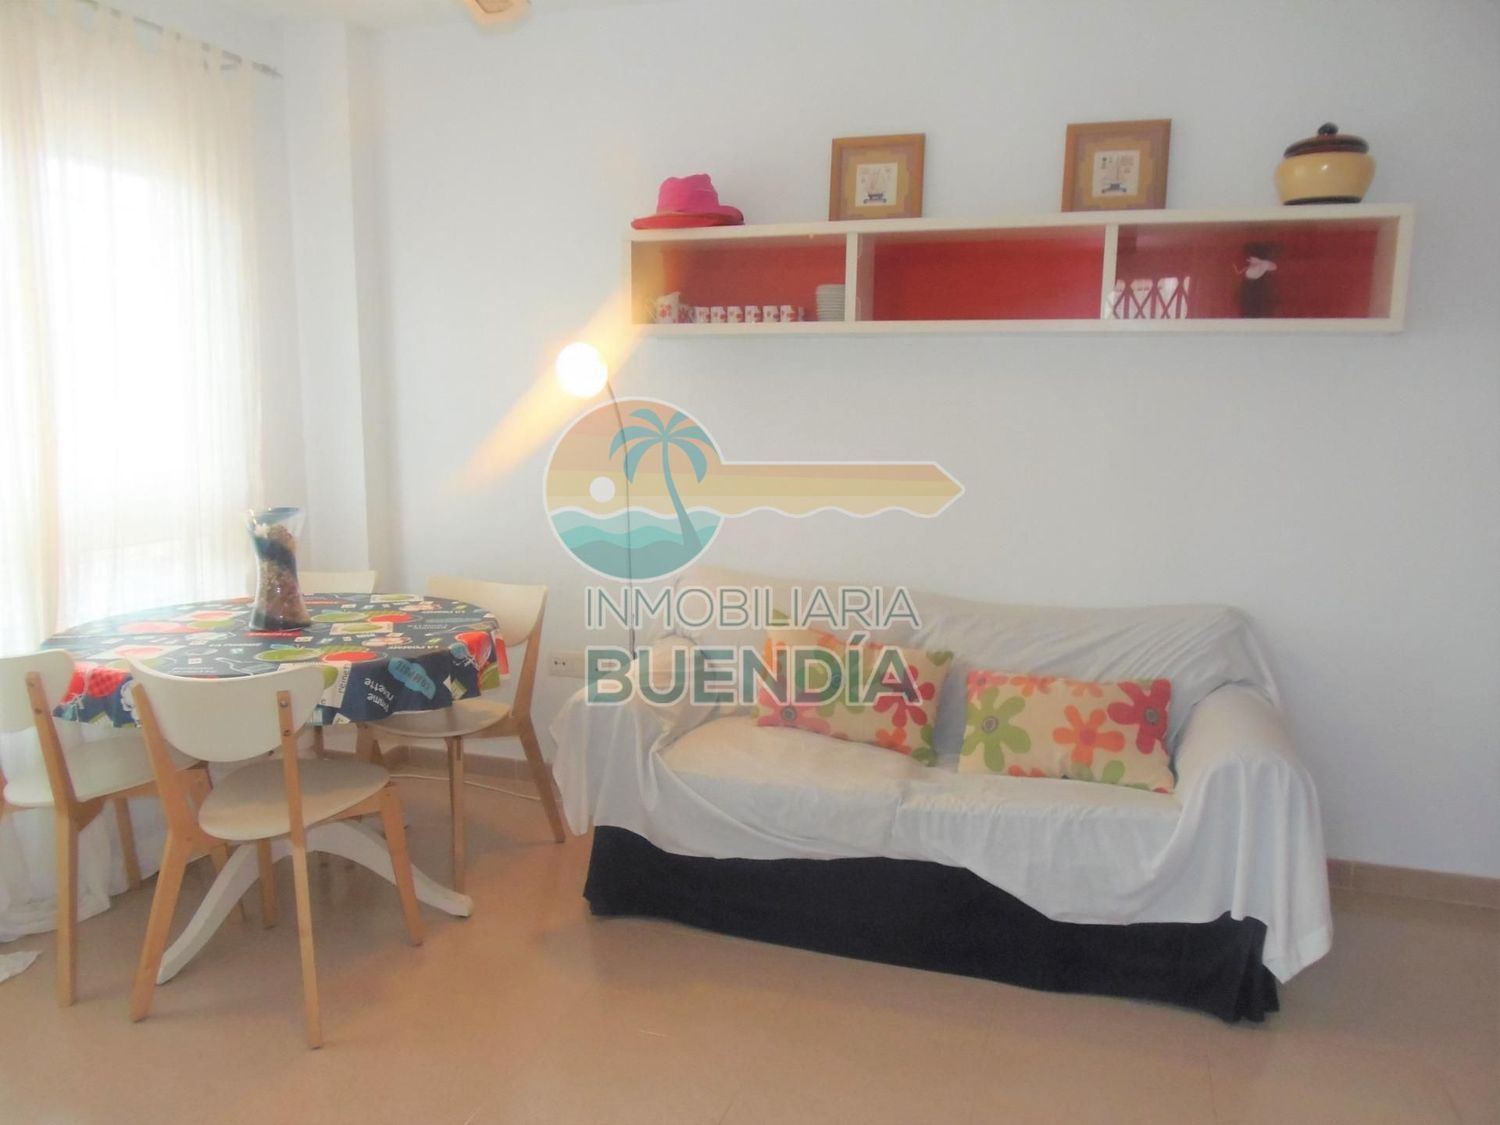 Ground floor for sale on the seafront in Residencial La Isla, in Mazarrón